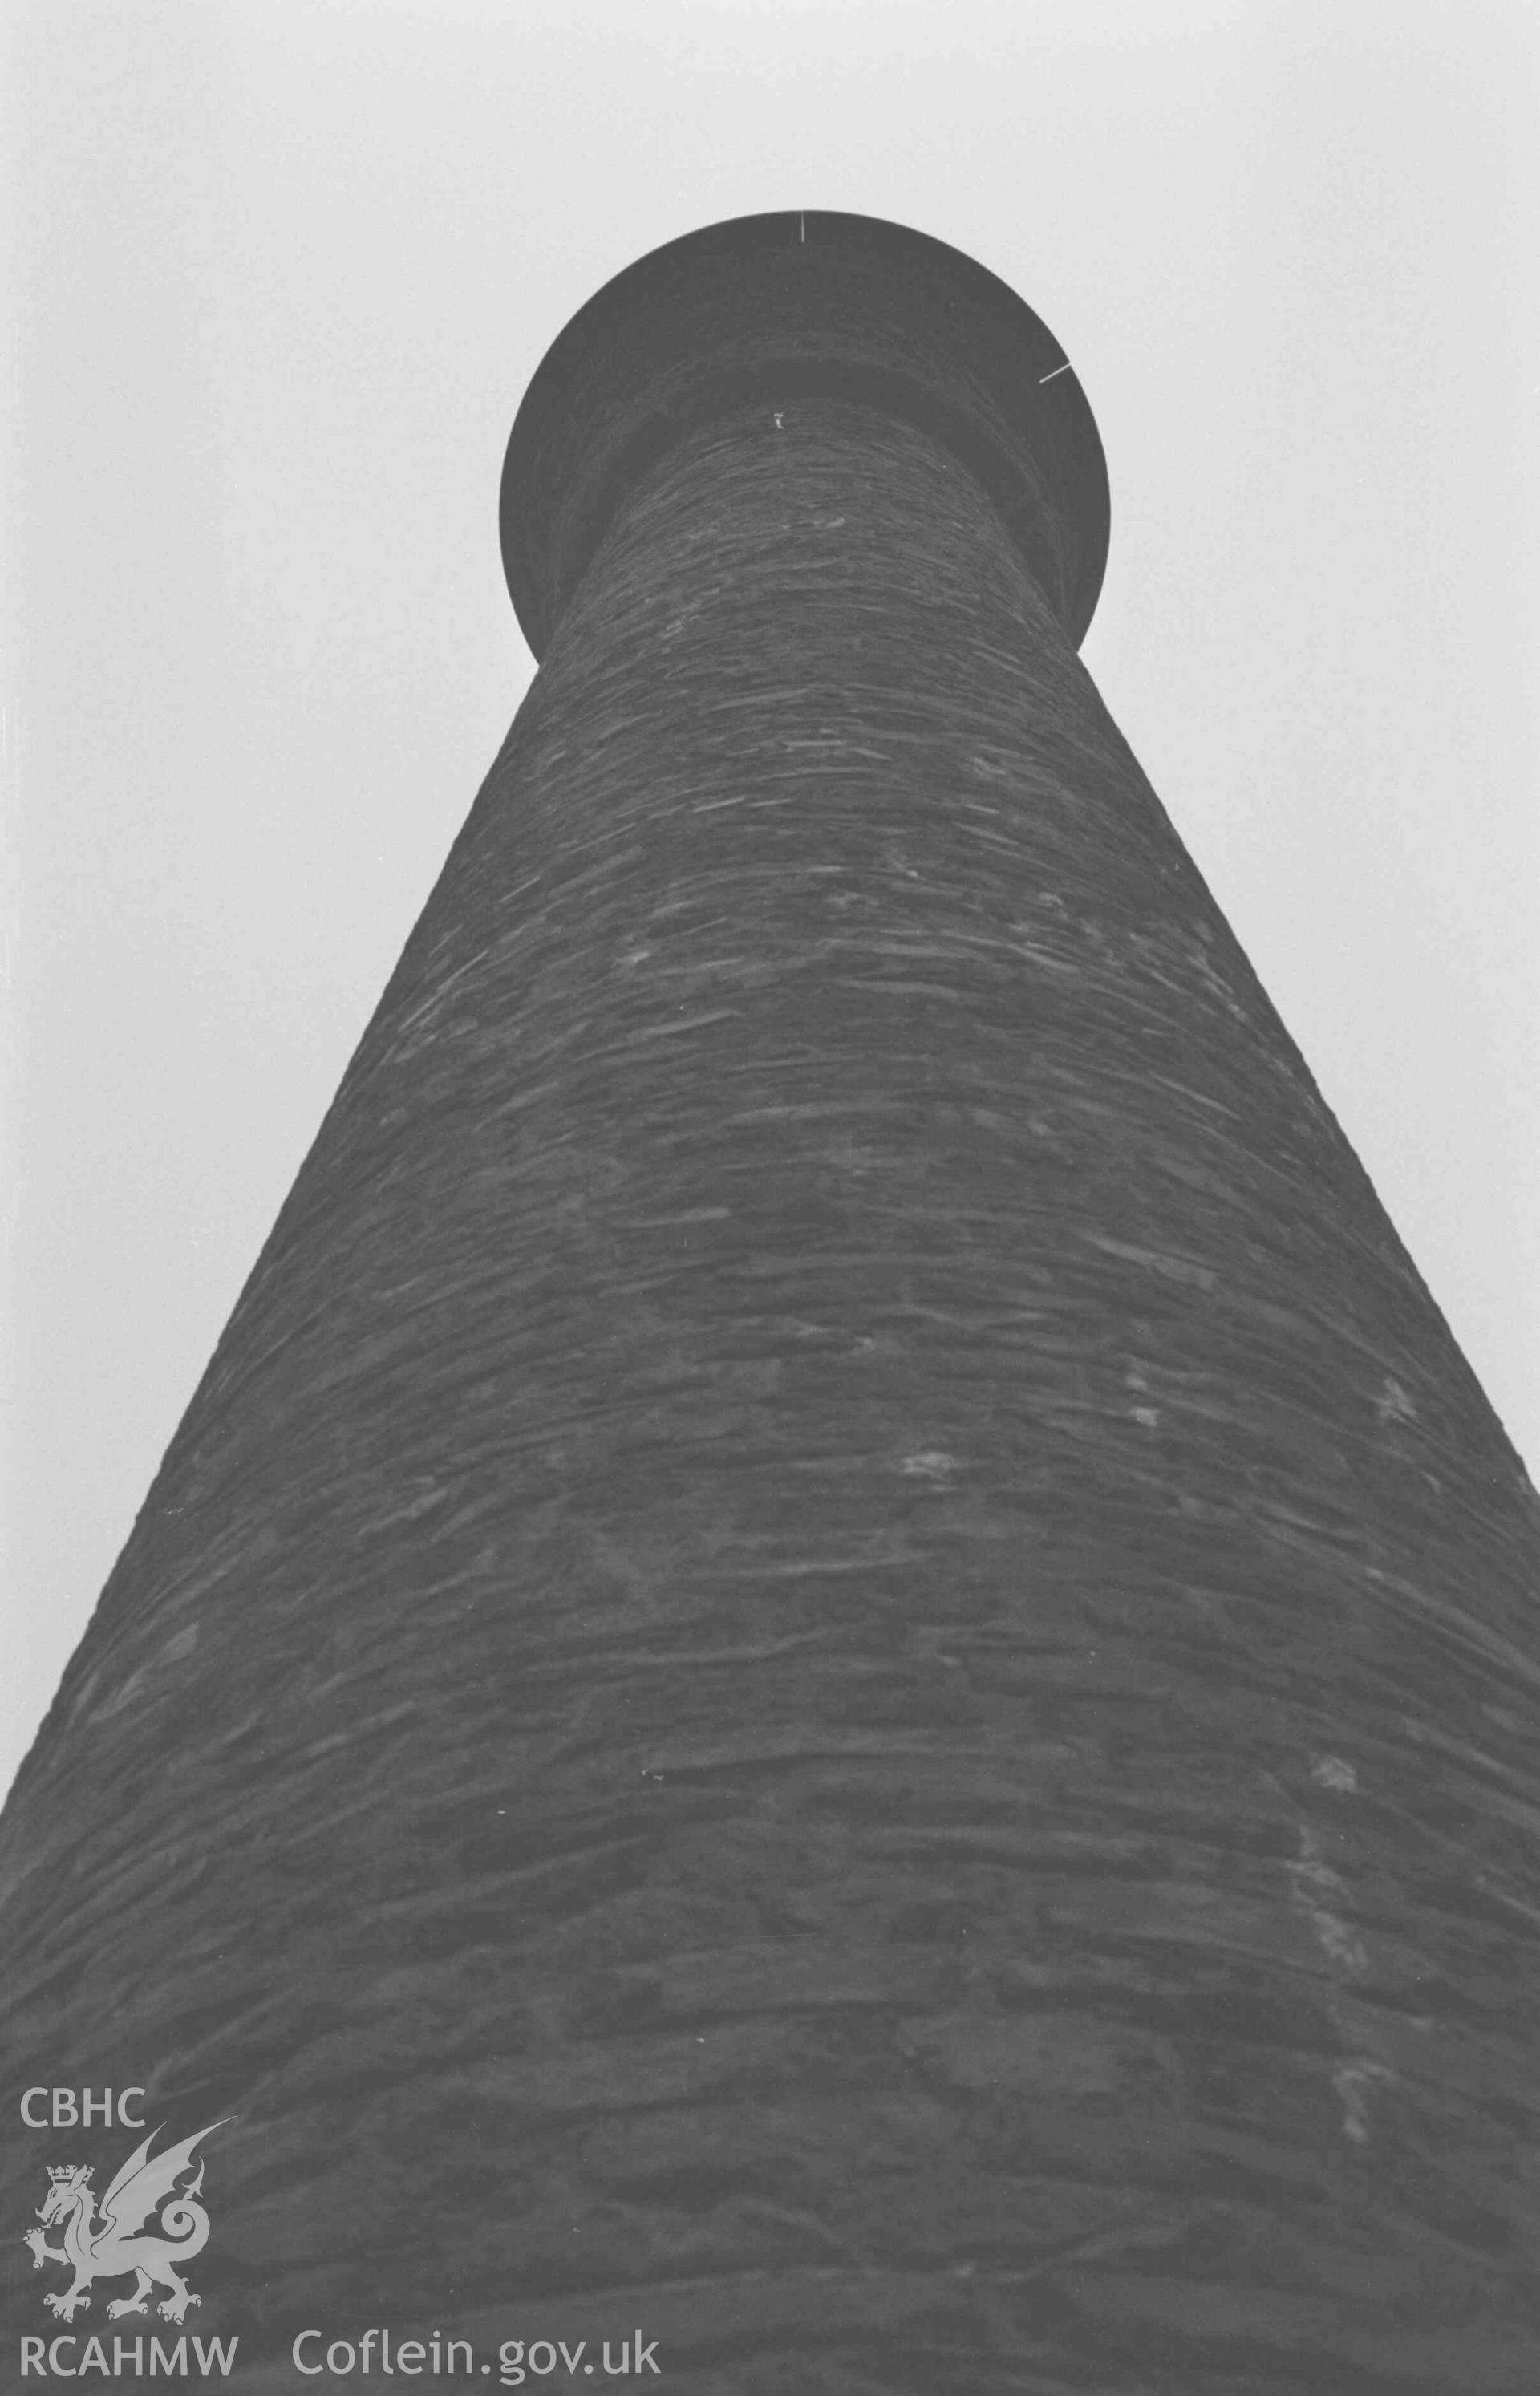 Digital copy of a black and white negative showing Wellington Monument on Pendinas, Aberystwyth. Photographed by Arthur Chater on 1 January 1969. Grid Reference SN 584 802.